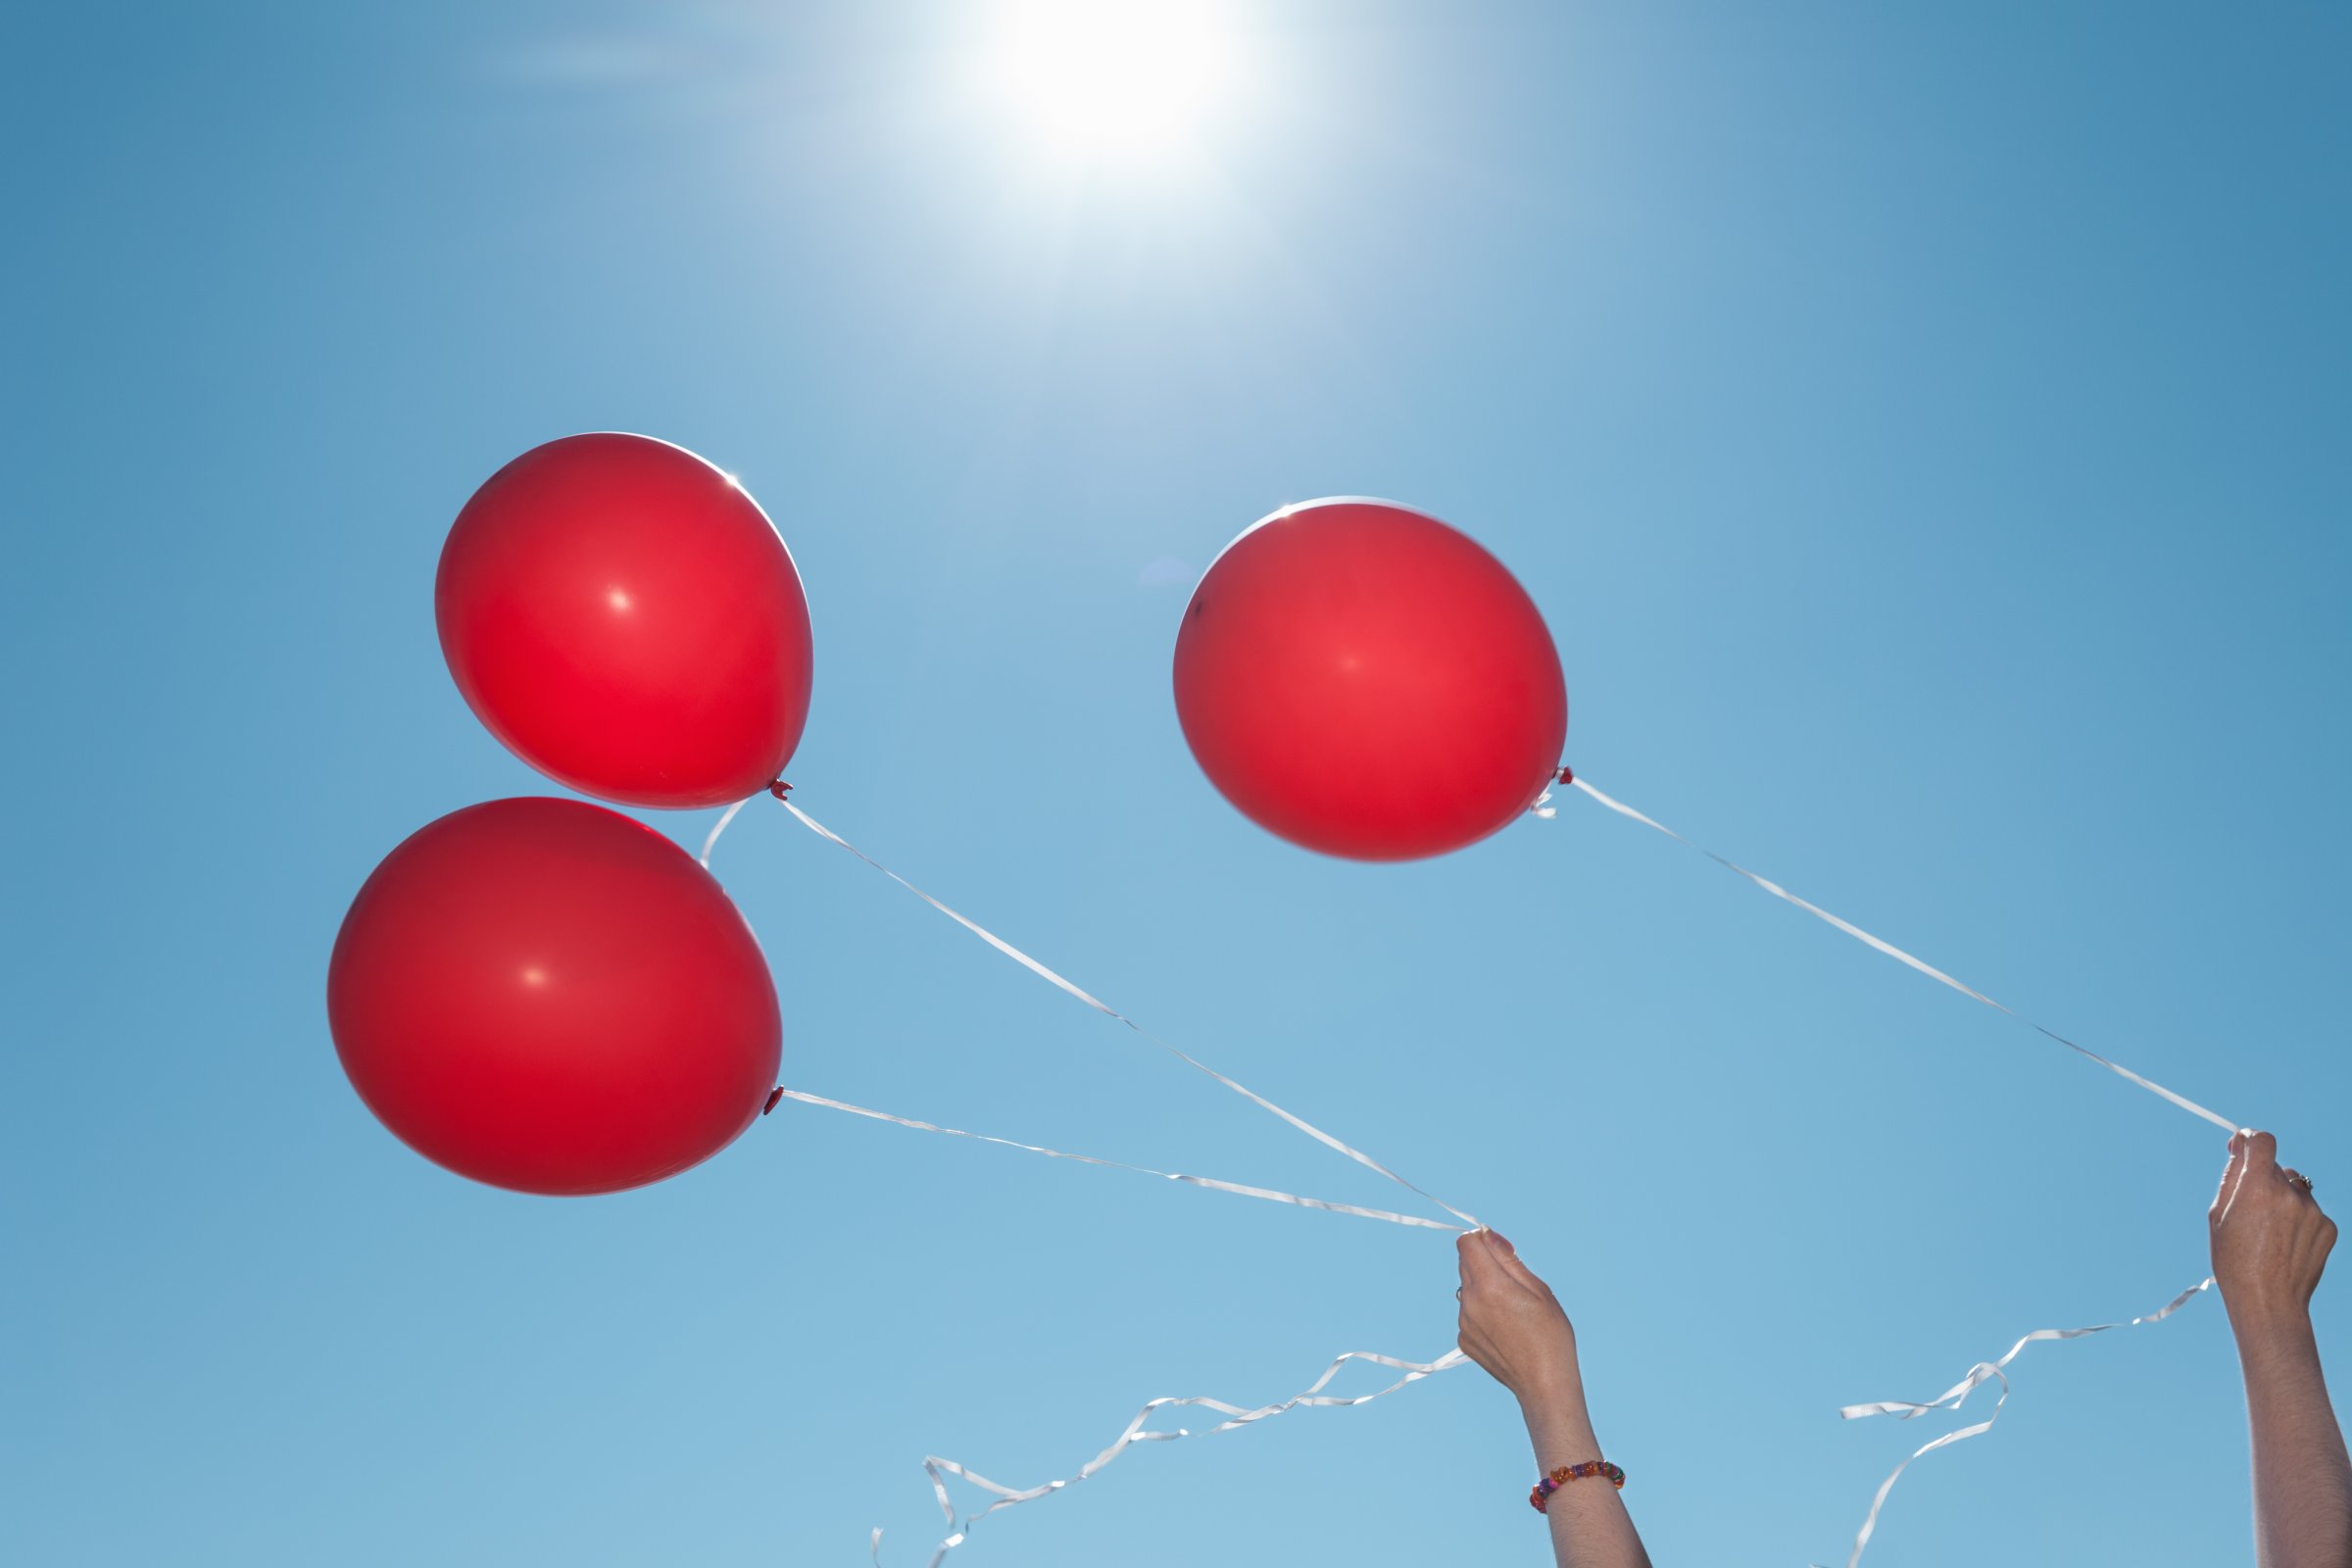 Hands holding three red balloons against blue sky